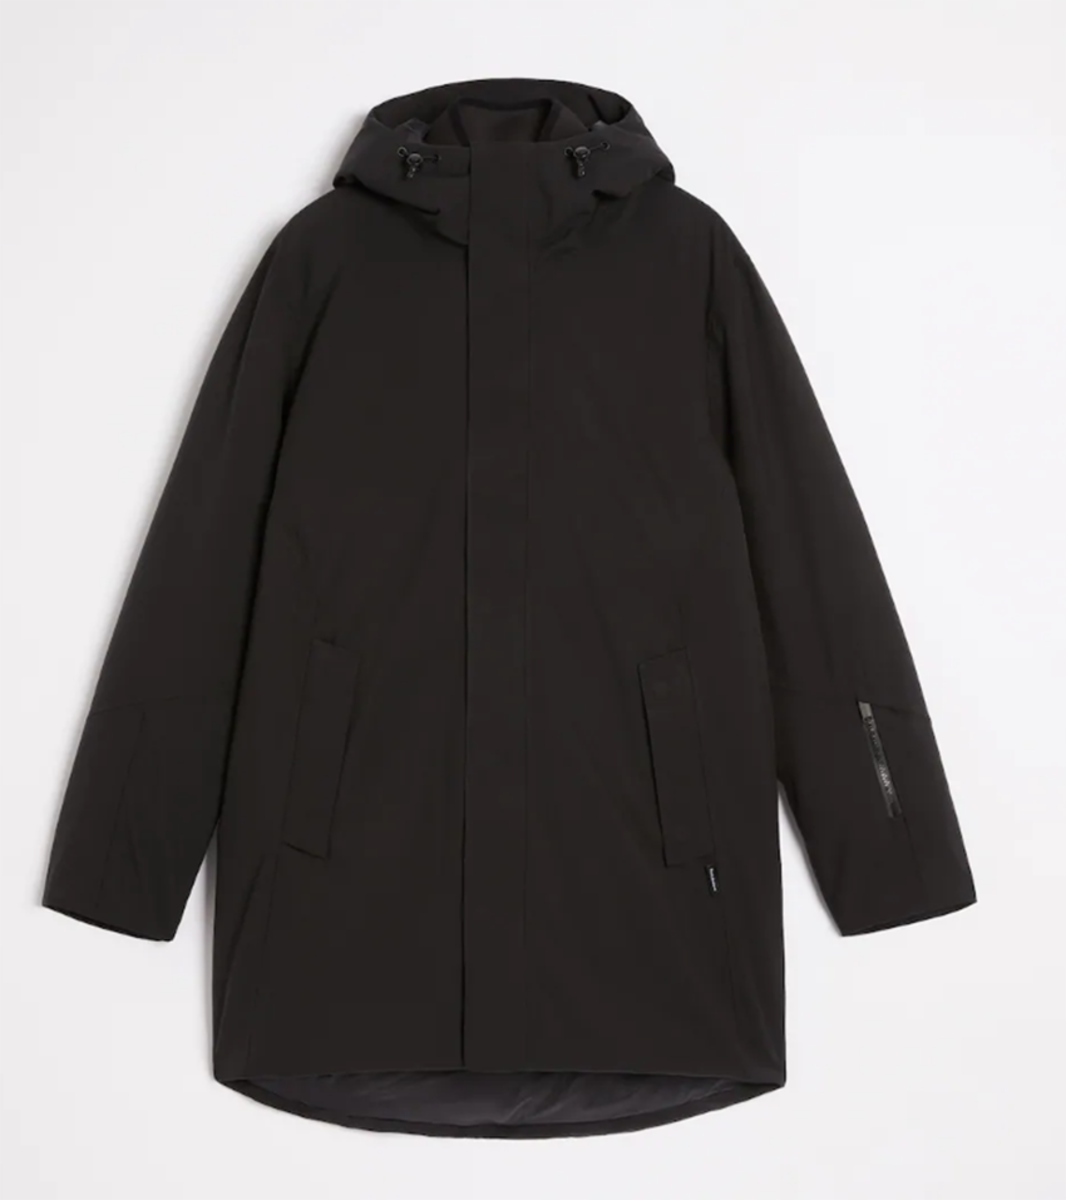 Frank and Oak Clothing The Capital Parka in Rosin - Frank and Oak Clothing